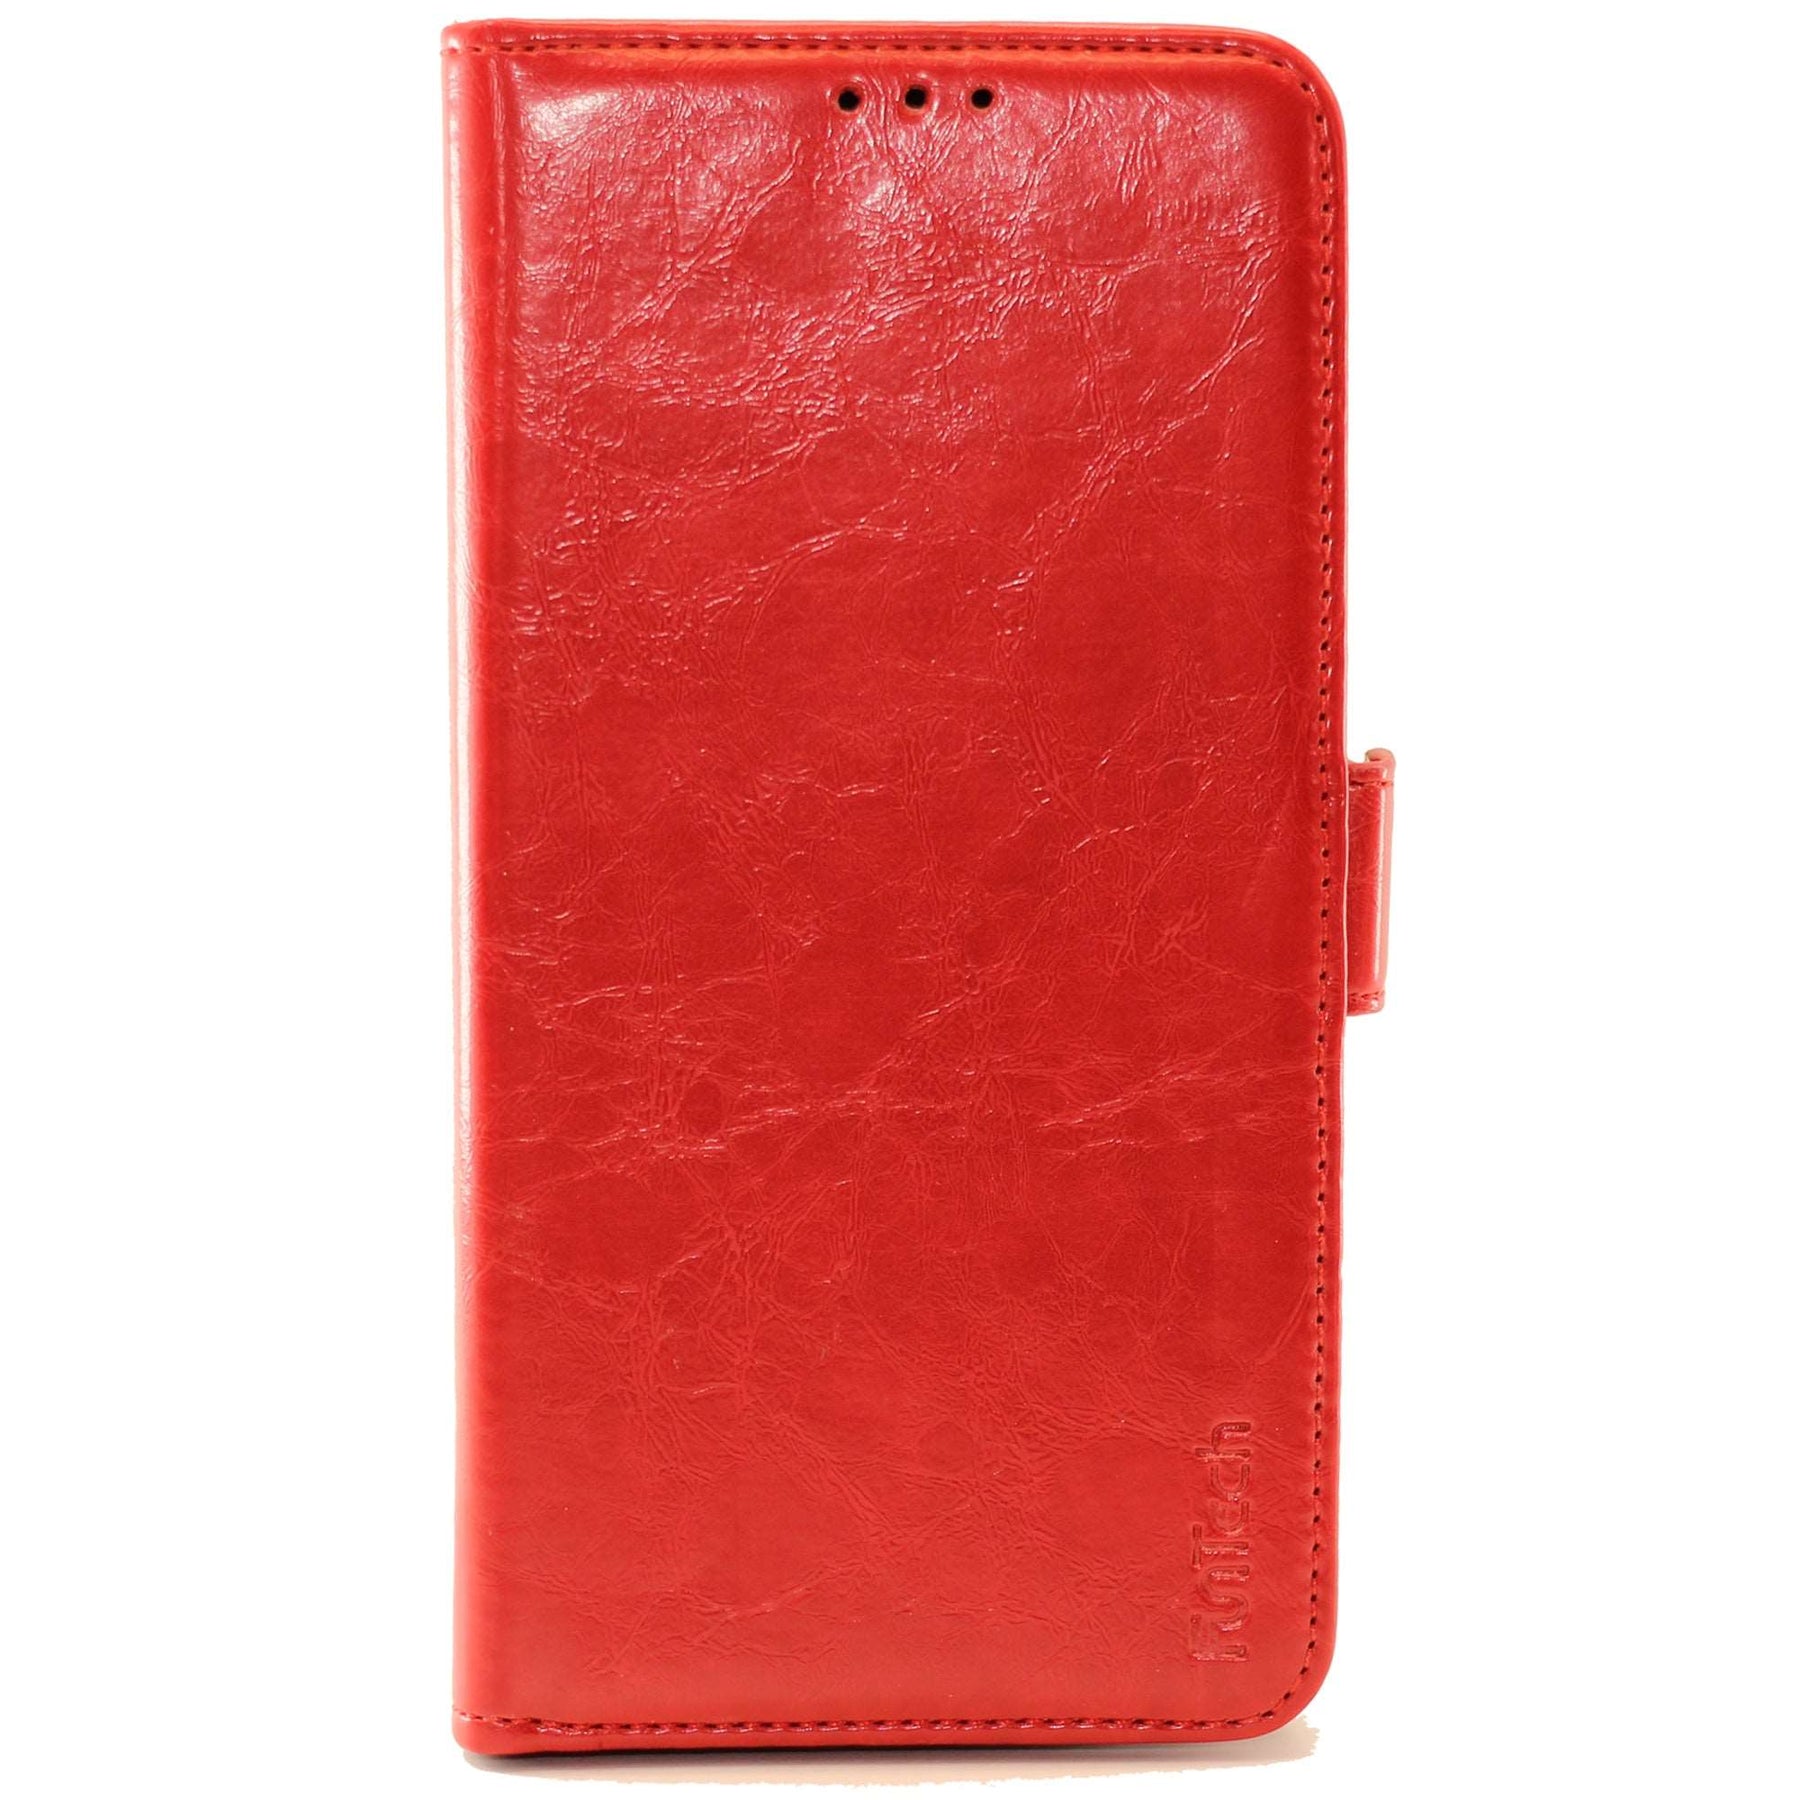 Apple iPhone XS Max Leather Wallet Case Color Red